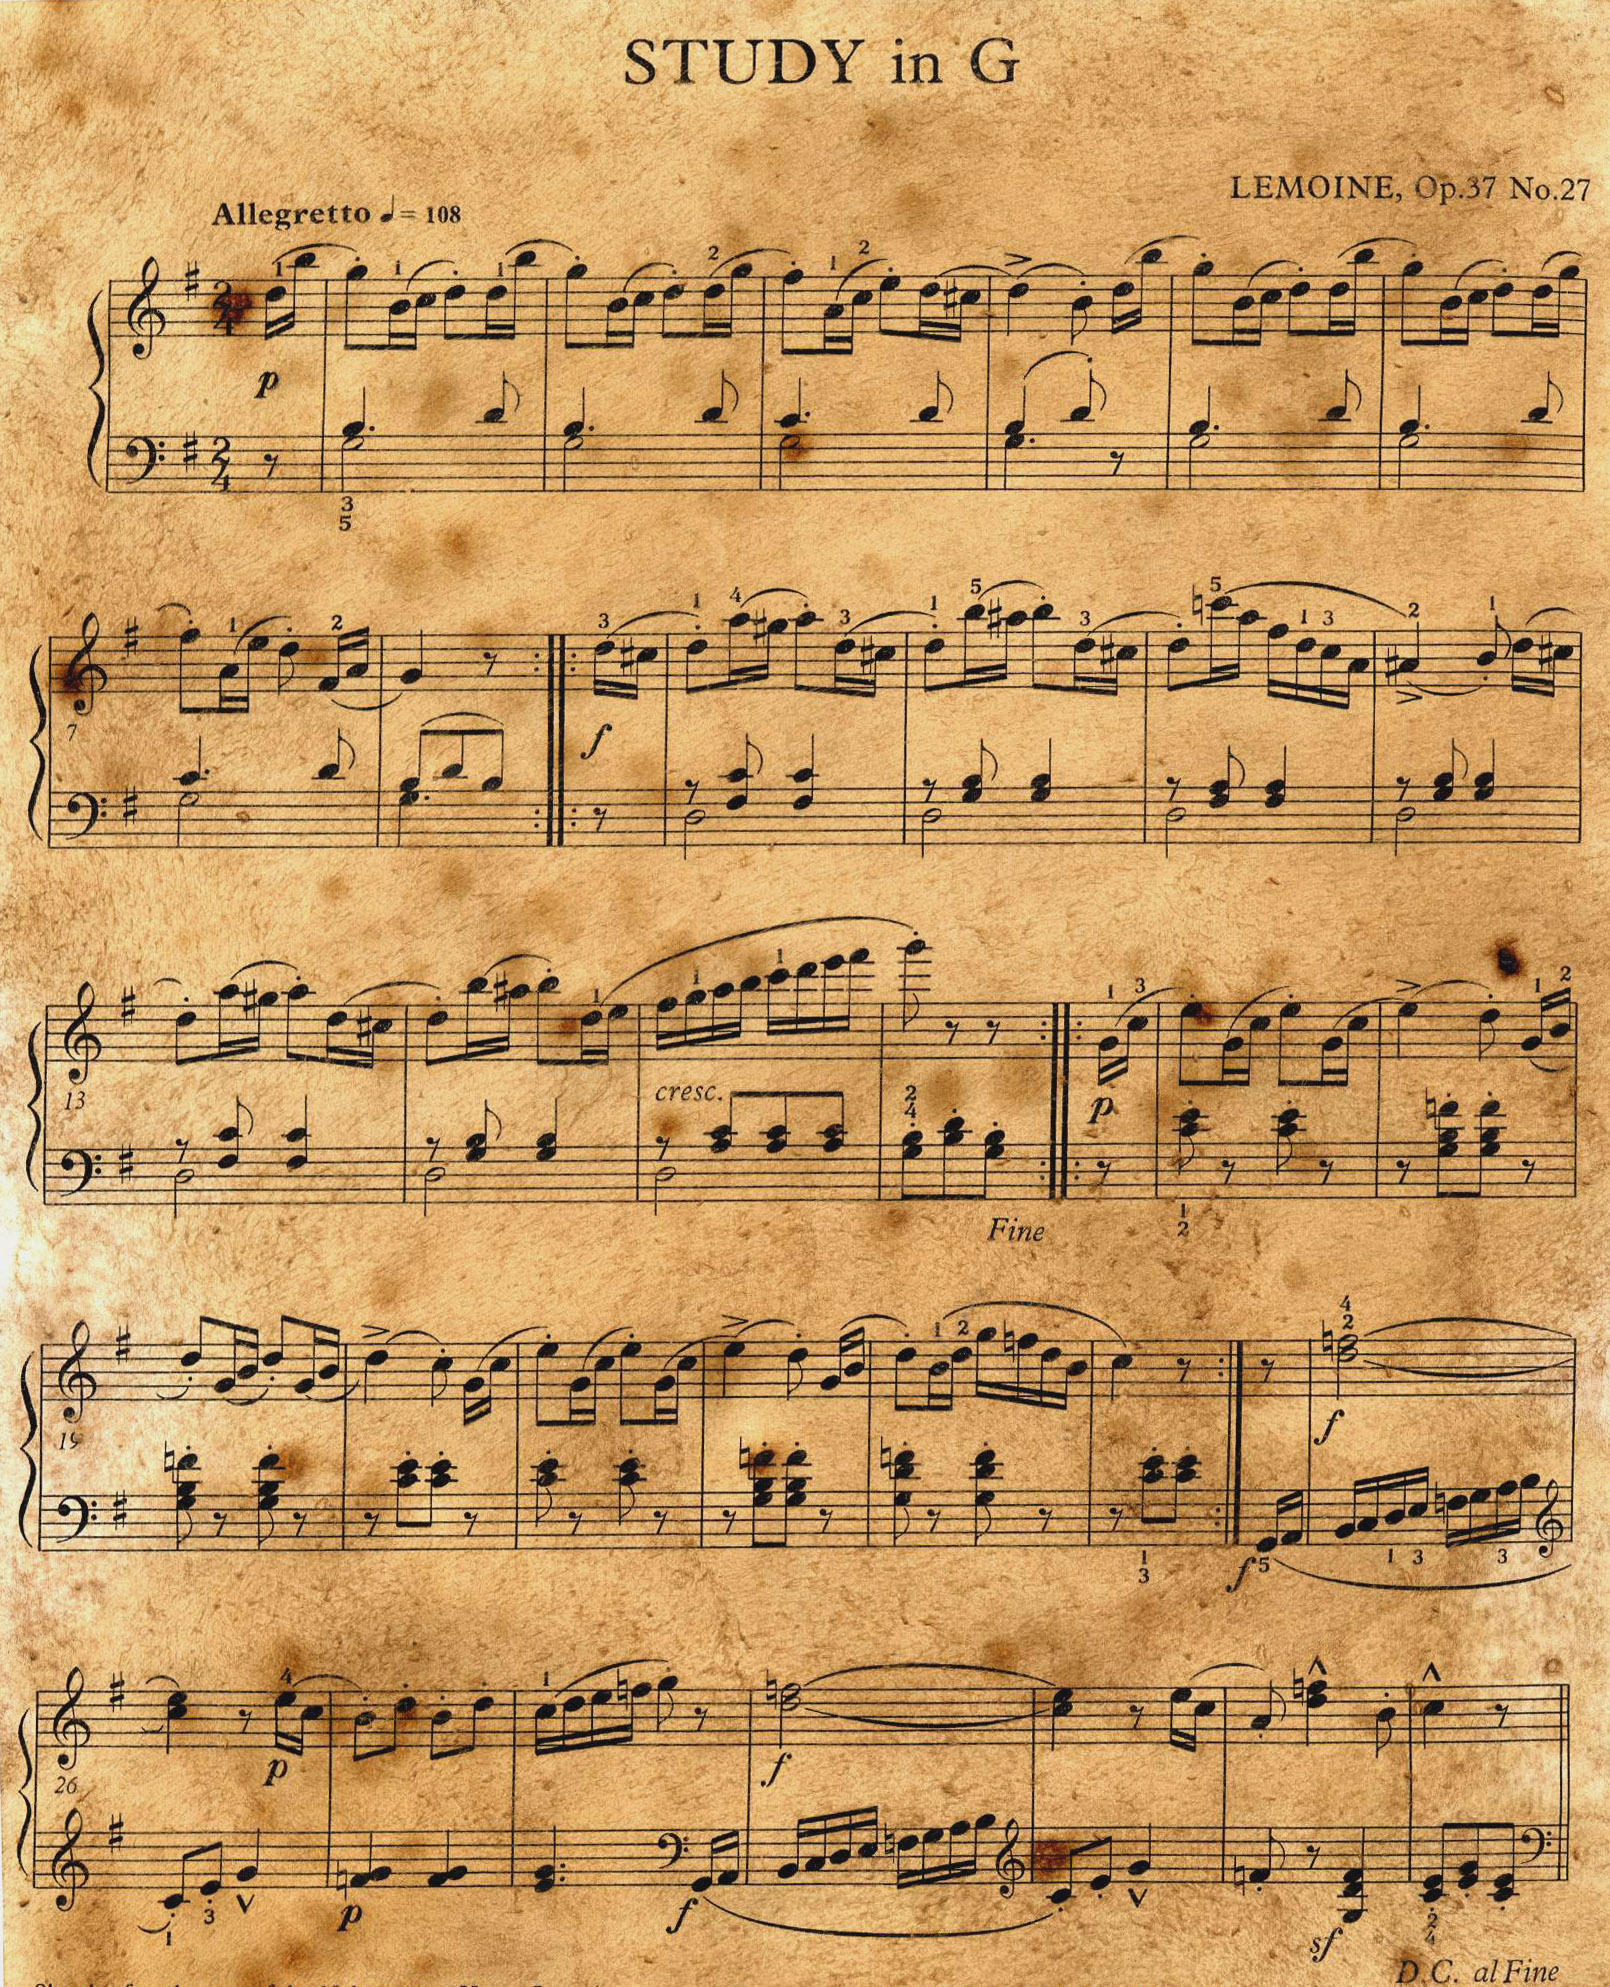 Vintage Music Sheet Stock by theoneandonly on DeviantArt